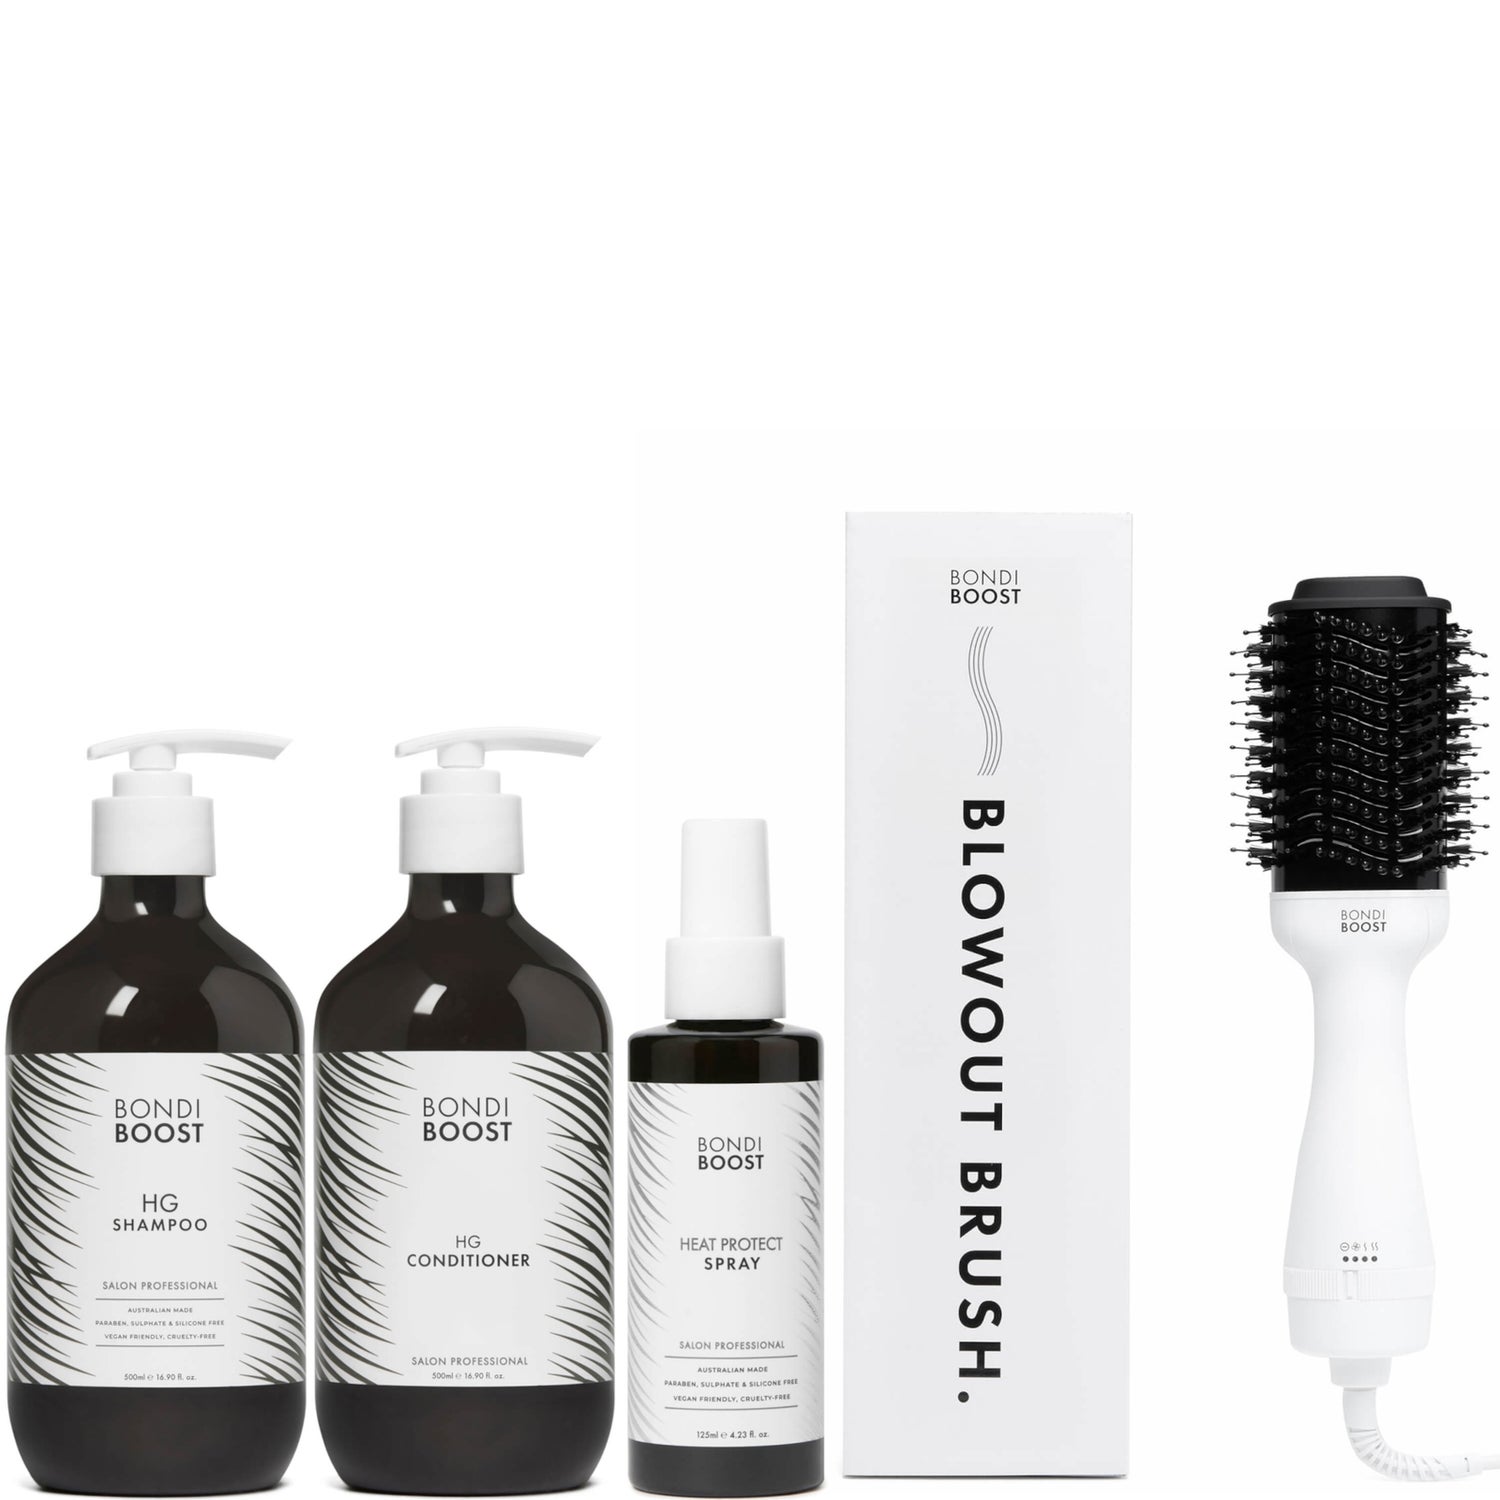 BondiBoost Blow out 75mm Brush, Heat Protect Spray and HG Shampoo and Conditioner Bundle